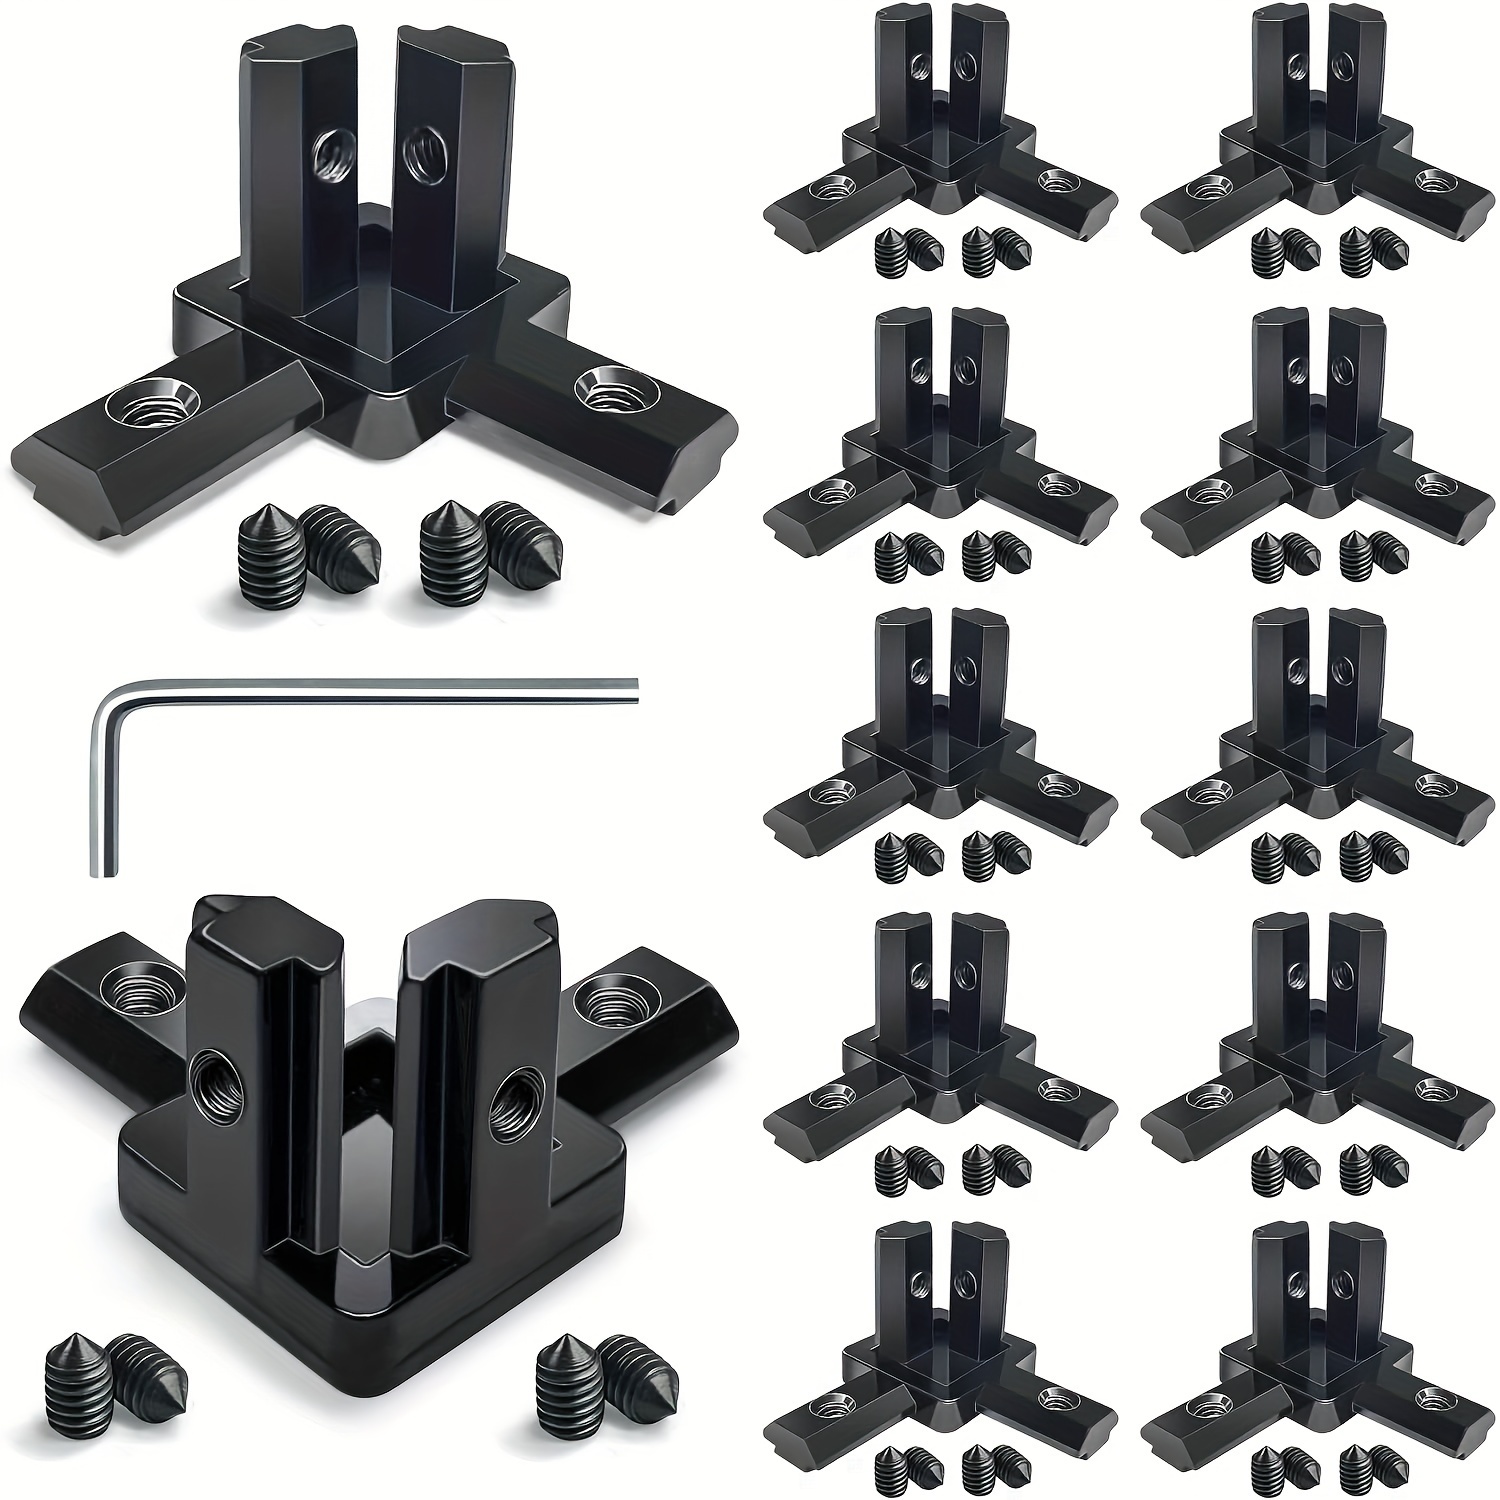 

12pcs Black 2020 Series 3-way End Corner Bracket Connector With Screws + 1pc Wrench For Slot 6mm 20s Aluminum Rail Accessories (12)